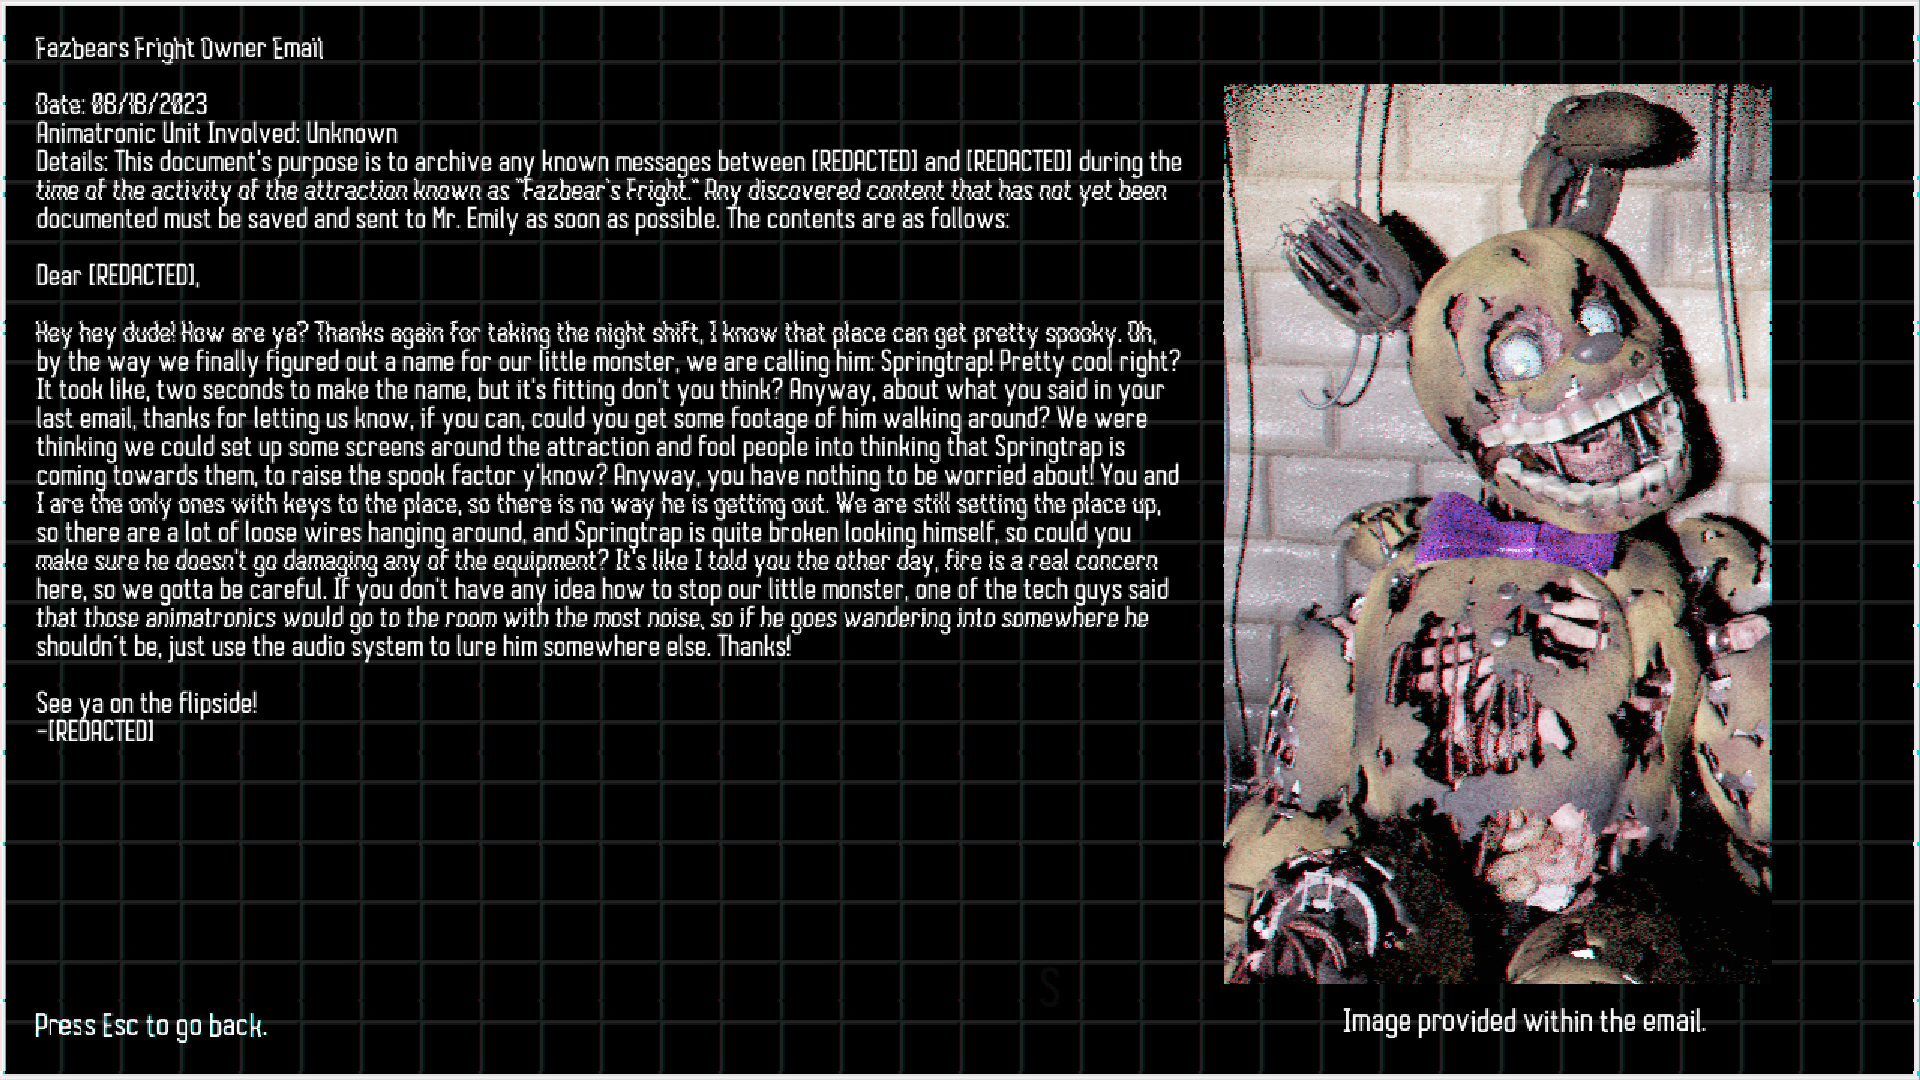 Five Nights at Freddy's Archives - The Game Hoard